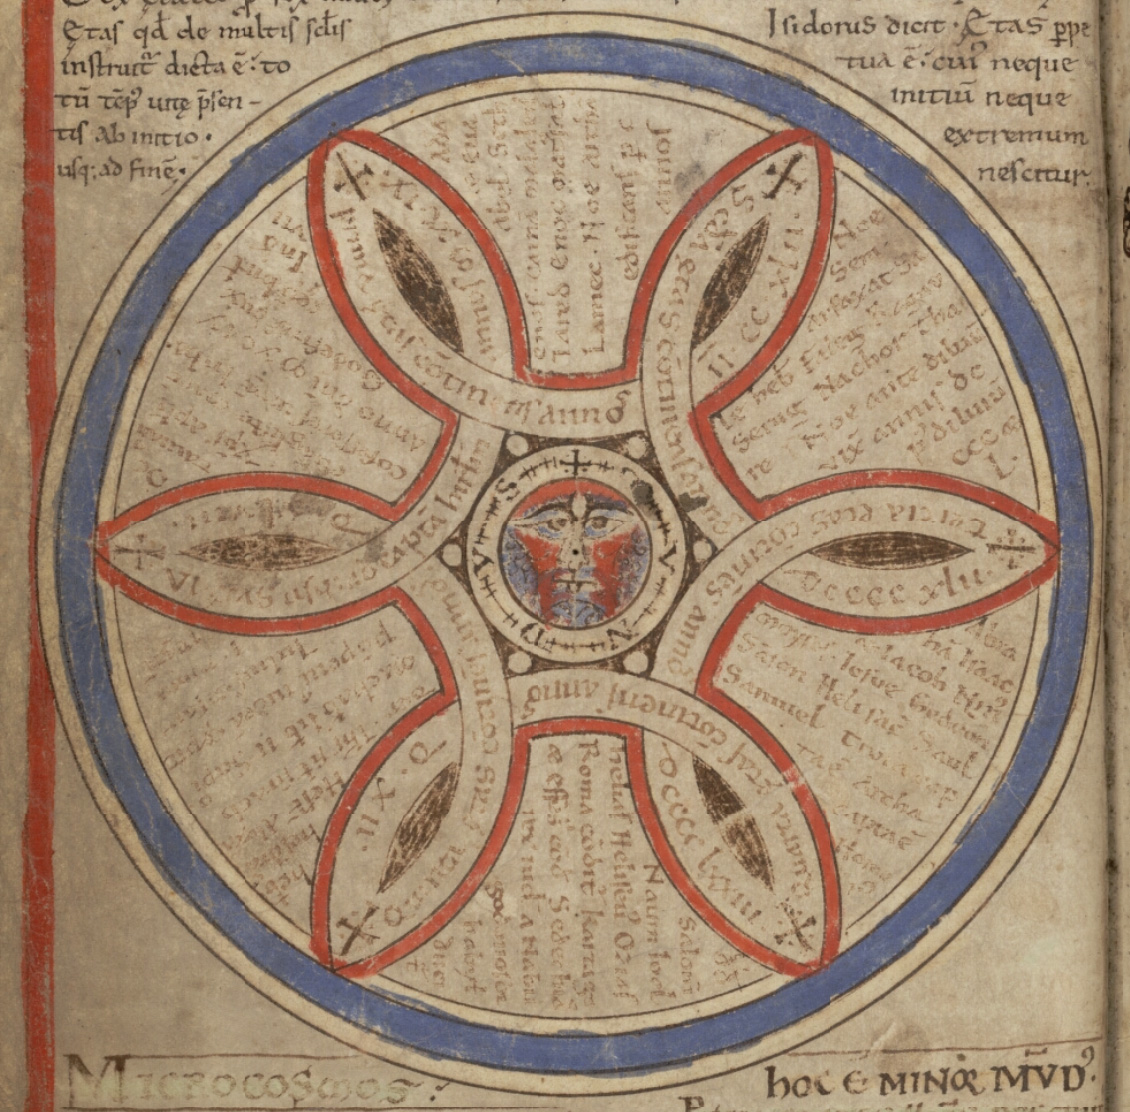 Ghent, University Library, ms. 92, fol. 20v (Saint-Omer, 1121): Liber Floridus, “Six Ages of the World”